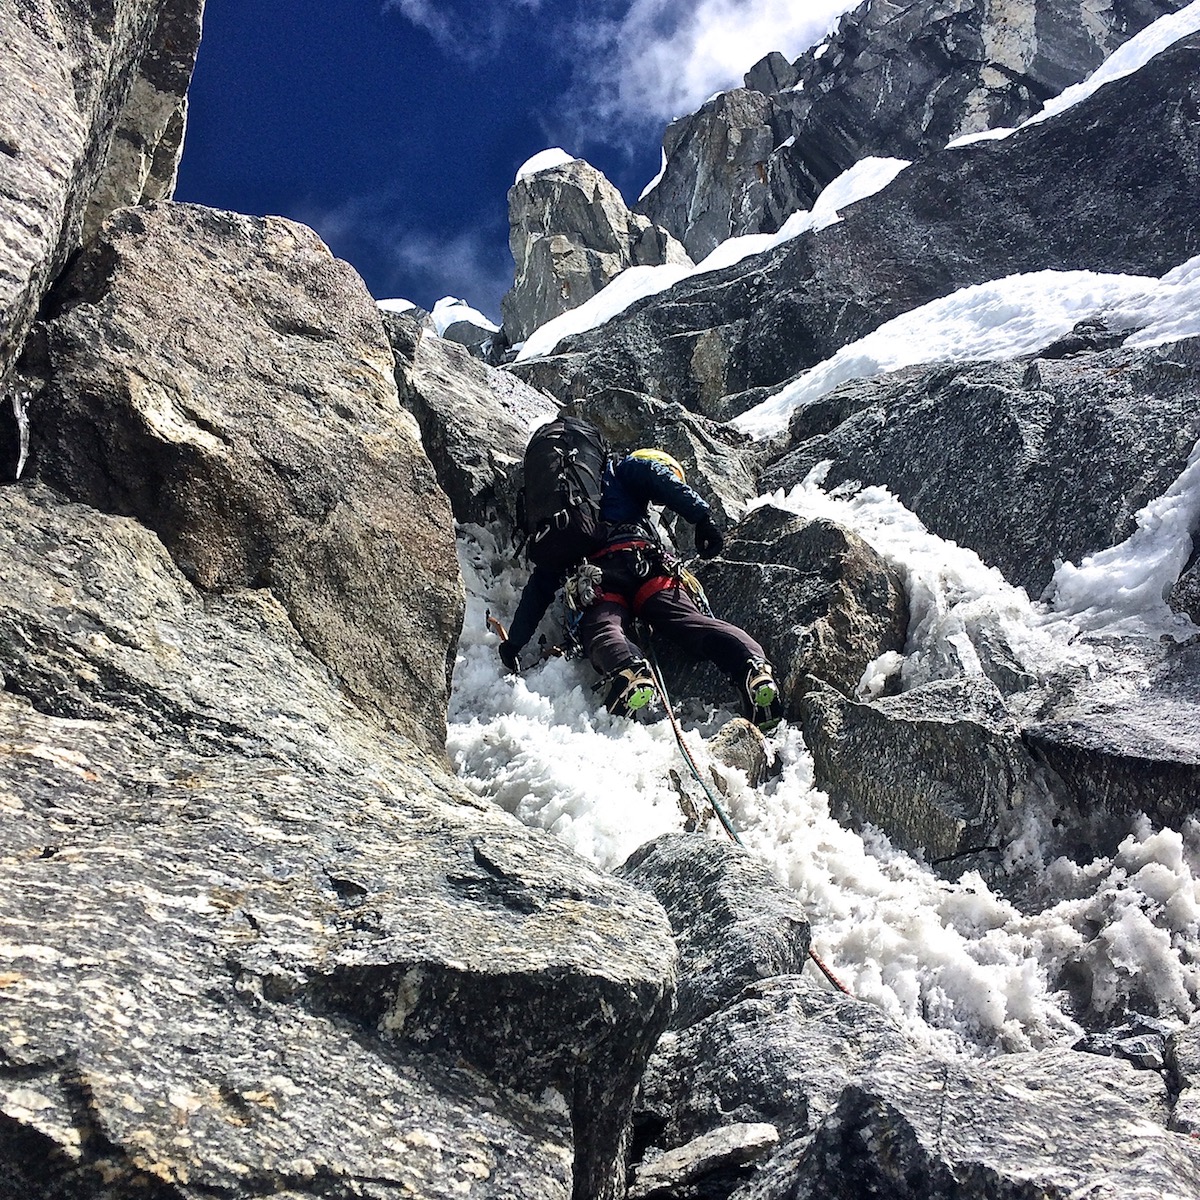 Pugliese sets off on an M5 pitch on the headwall of Chugimago. [Photo] Nik Mirhashemi